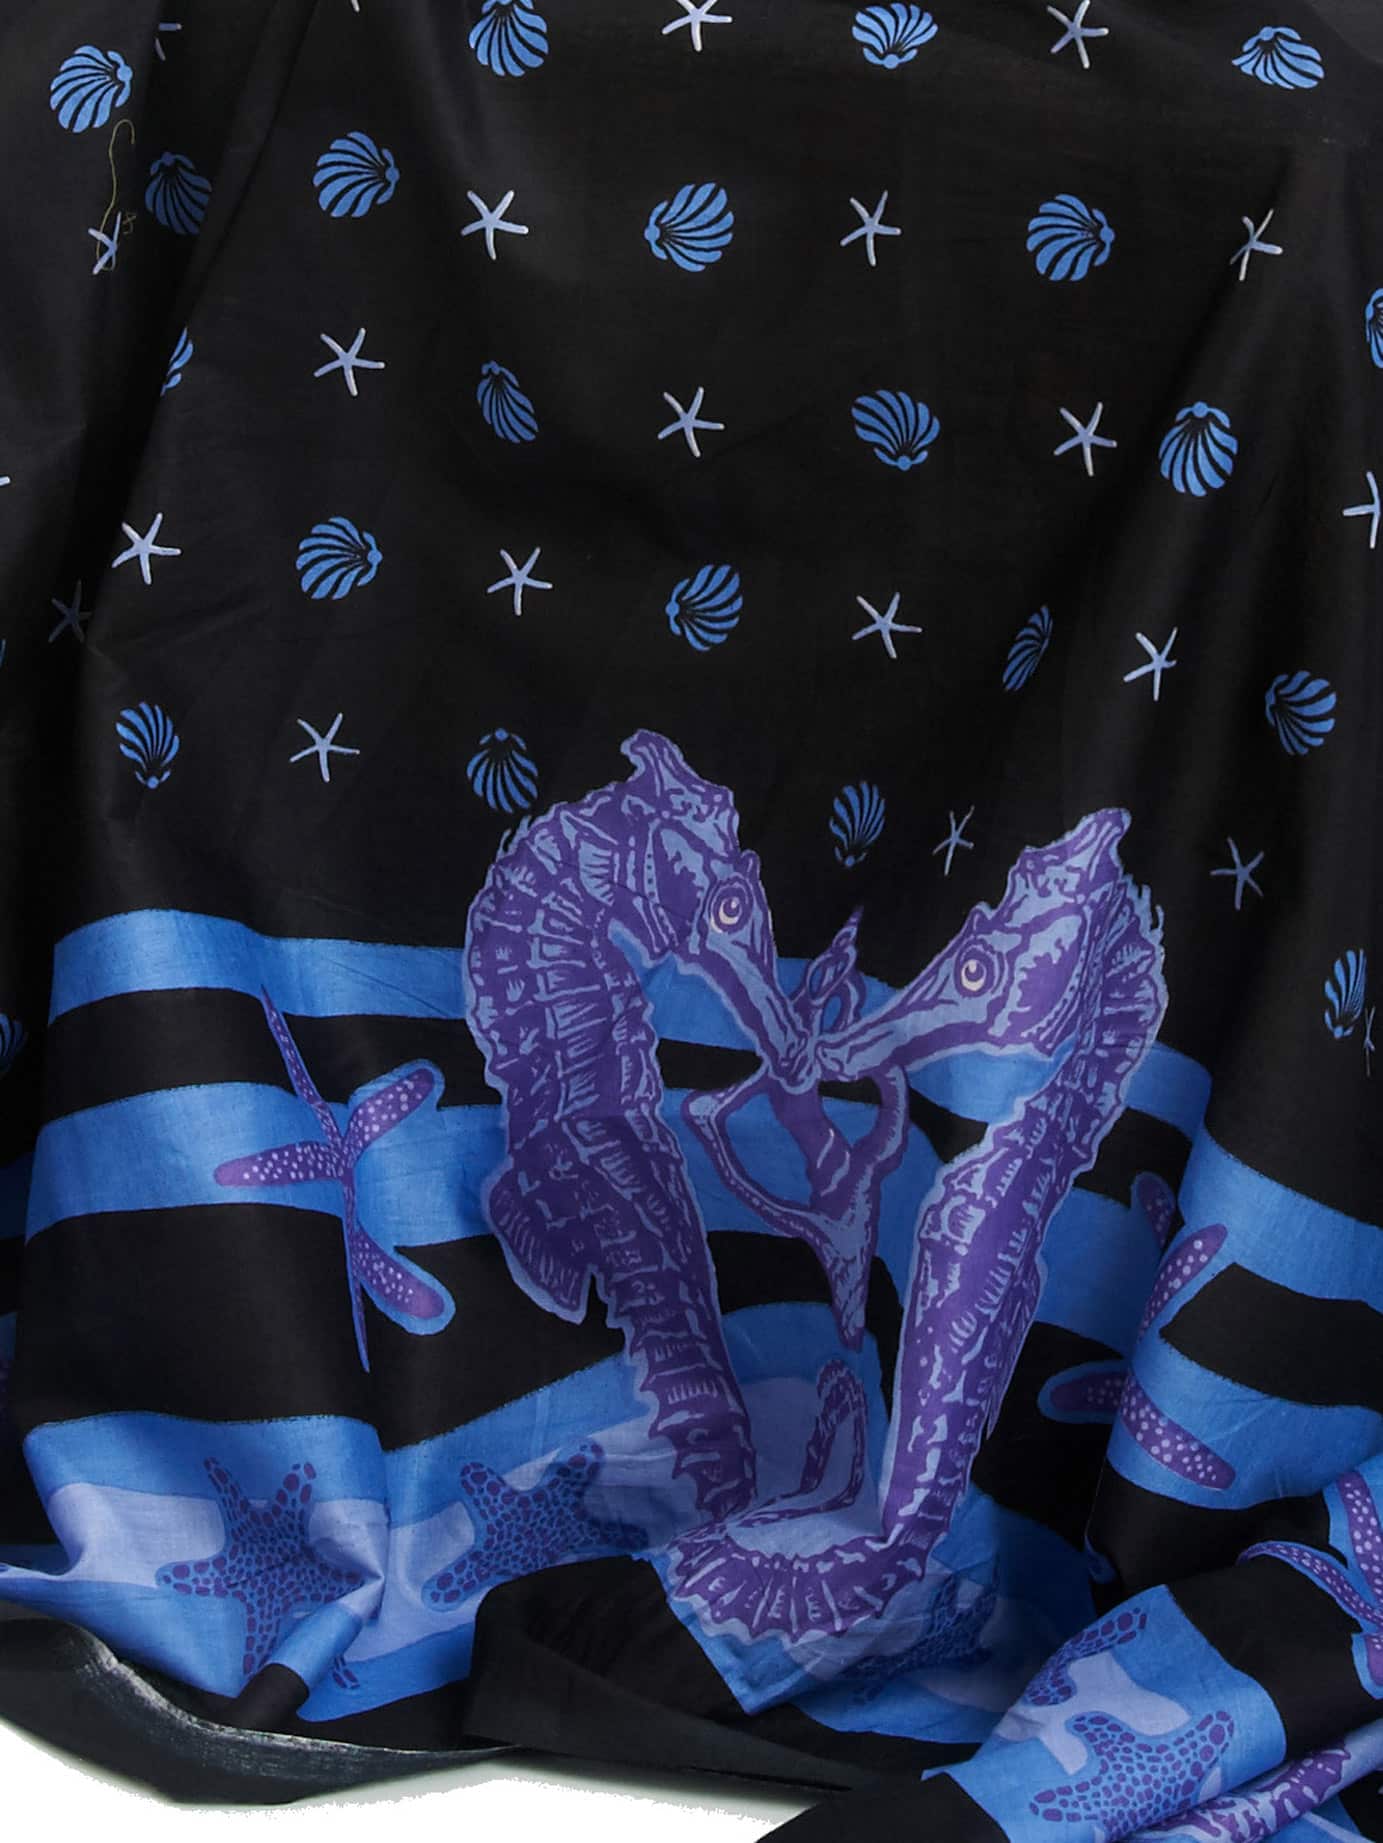 A cotton sarong printed with seahorses and shells on a black background.